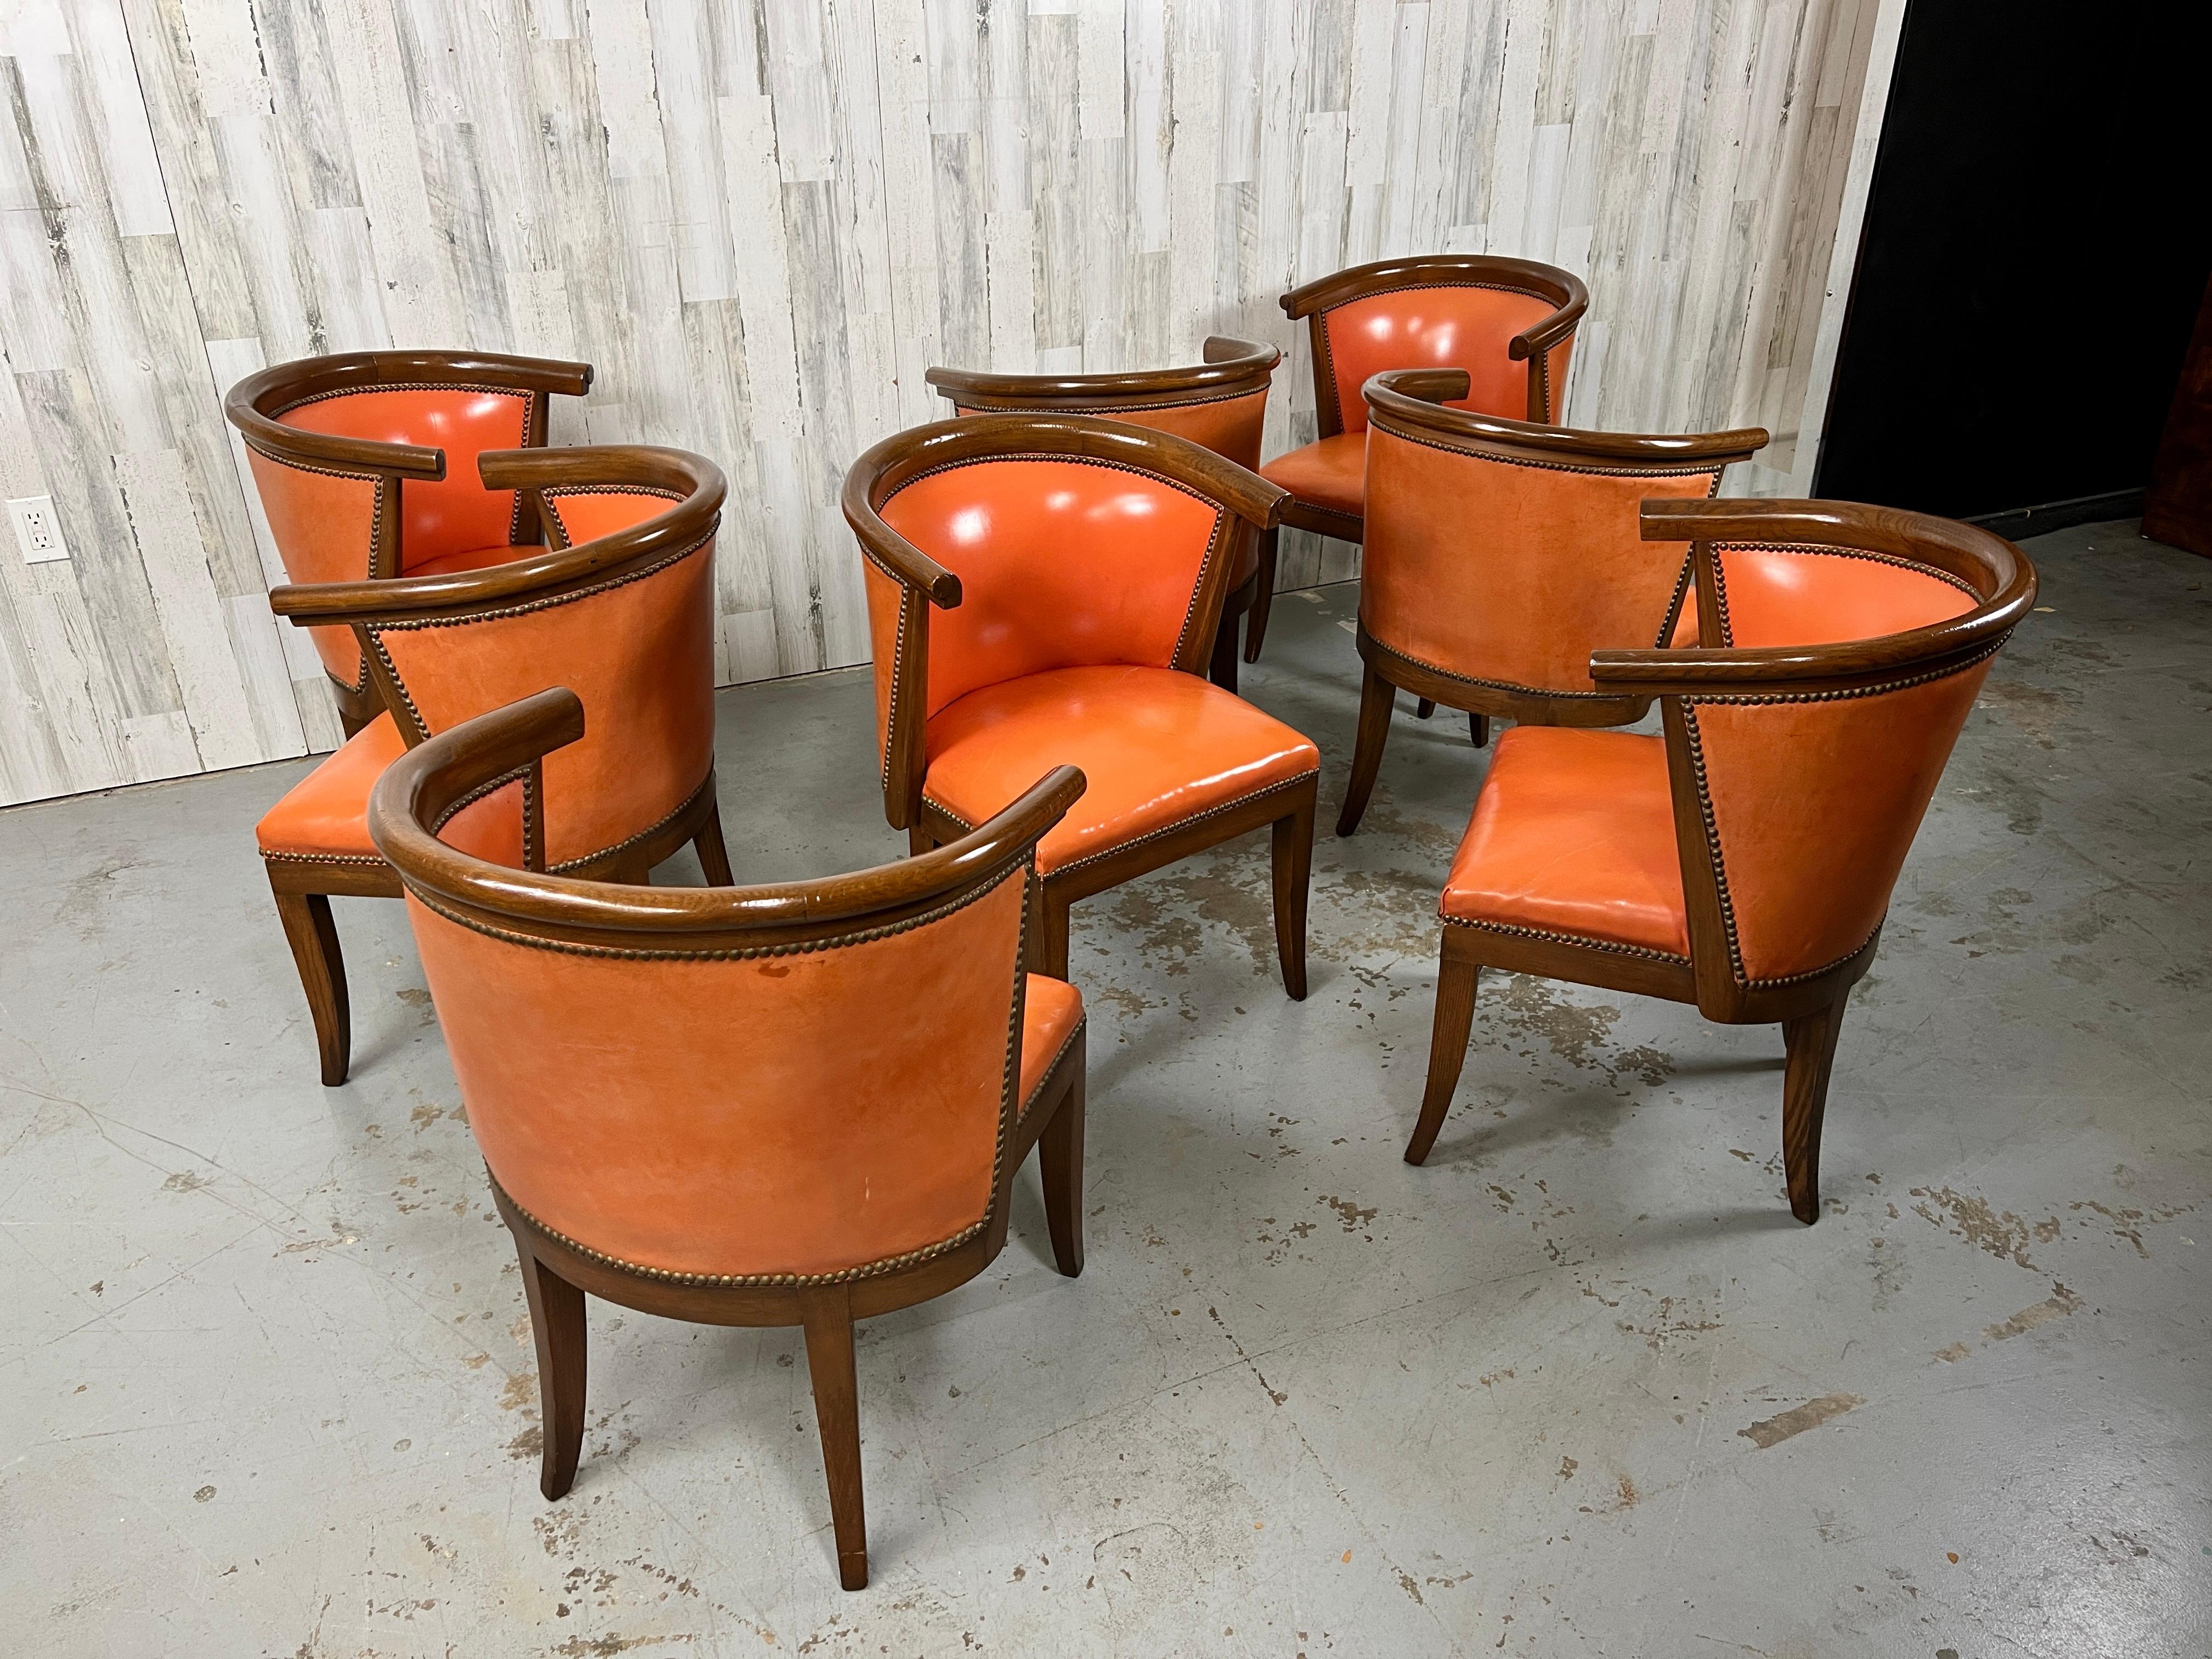 Set of 8 oak horseshoe barrel back dining chairs with original orange leather. Designed by Harold Schwartz for Romweber furniture company these chairs are very comfortable and sturdy.